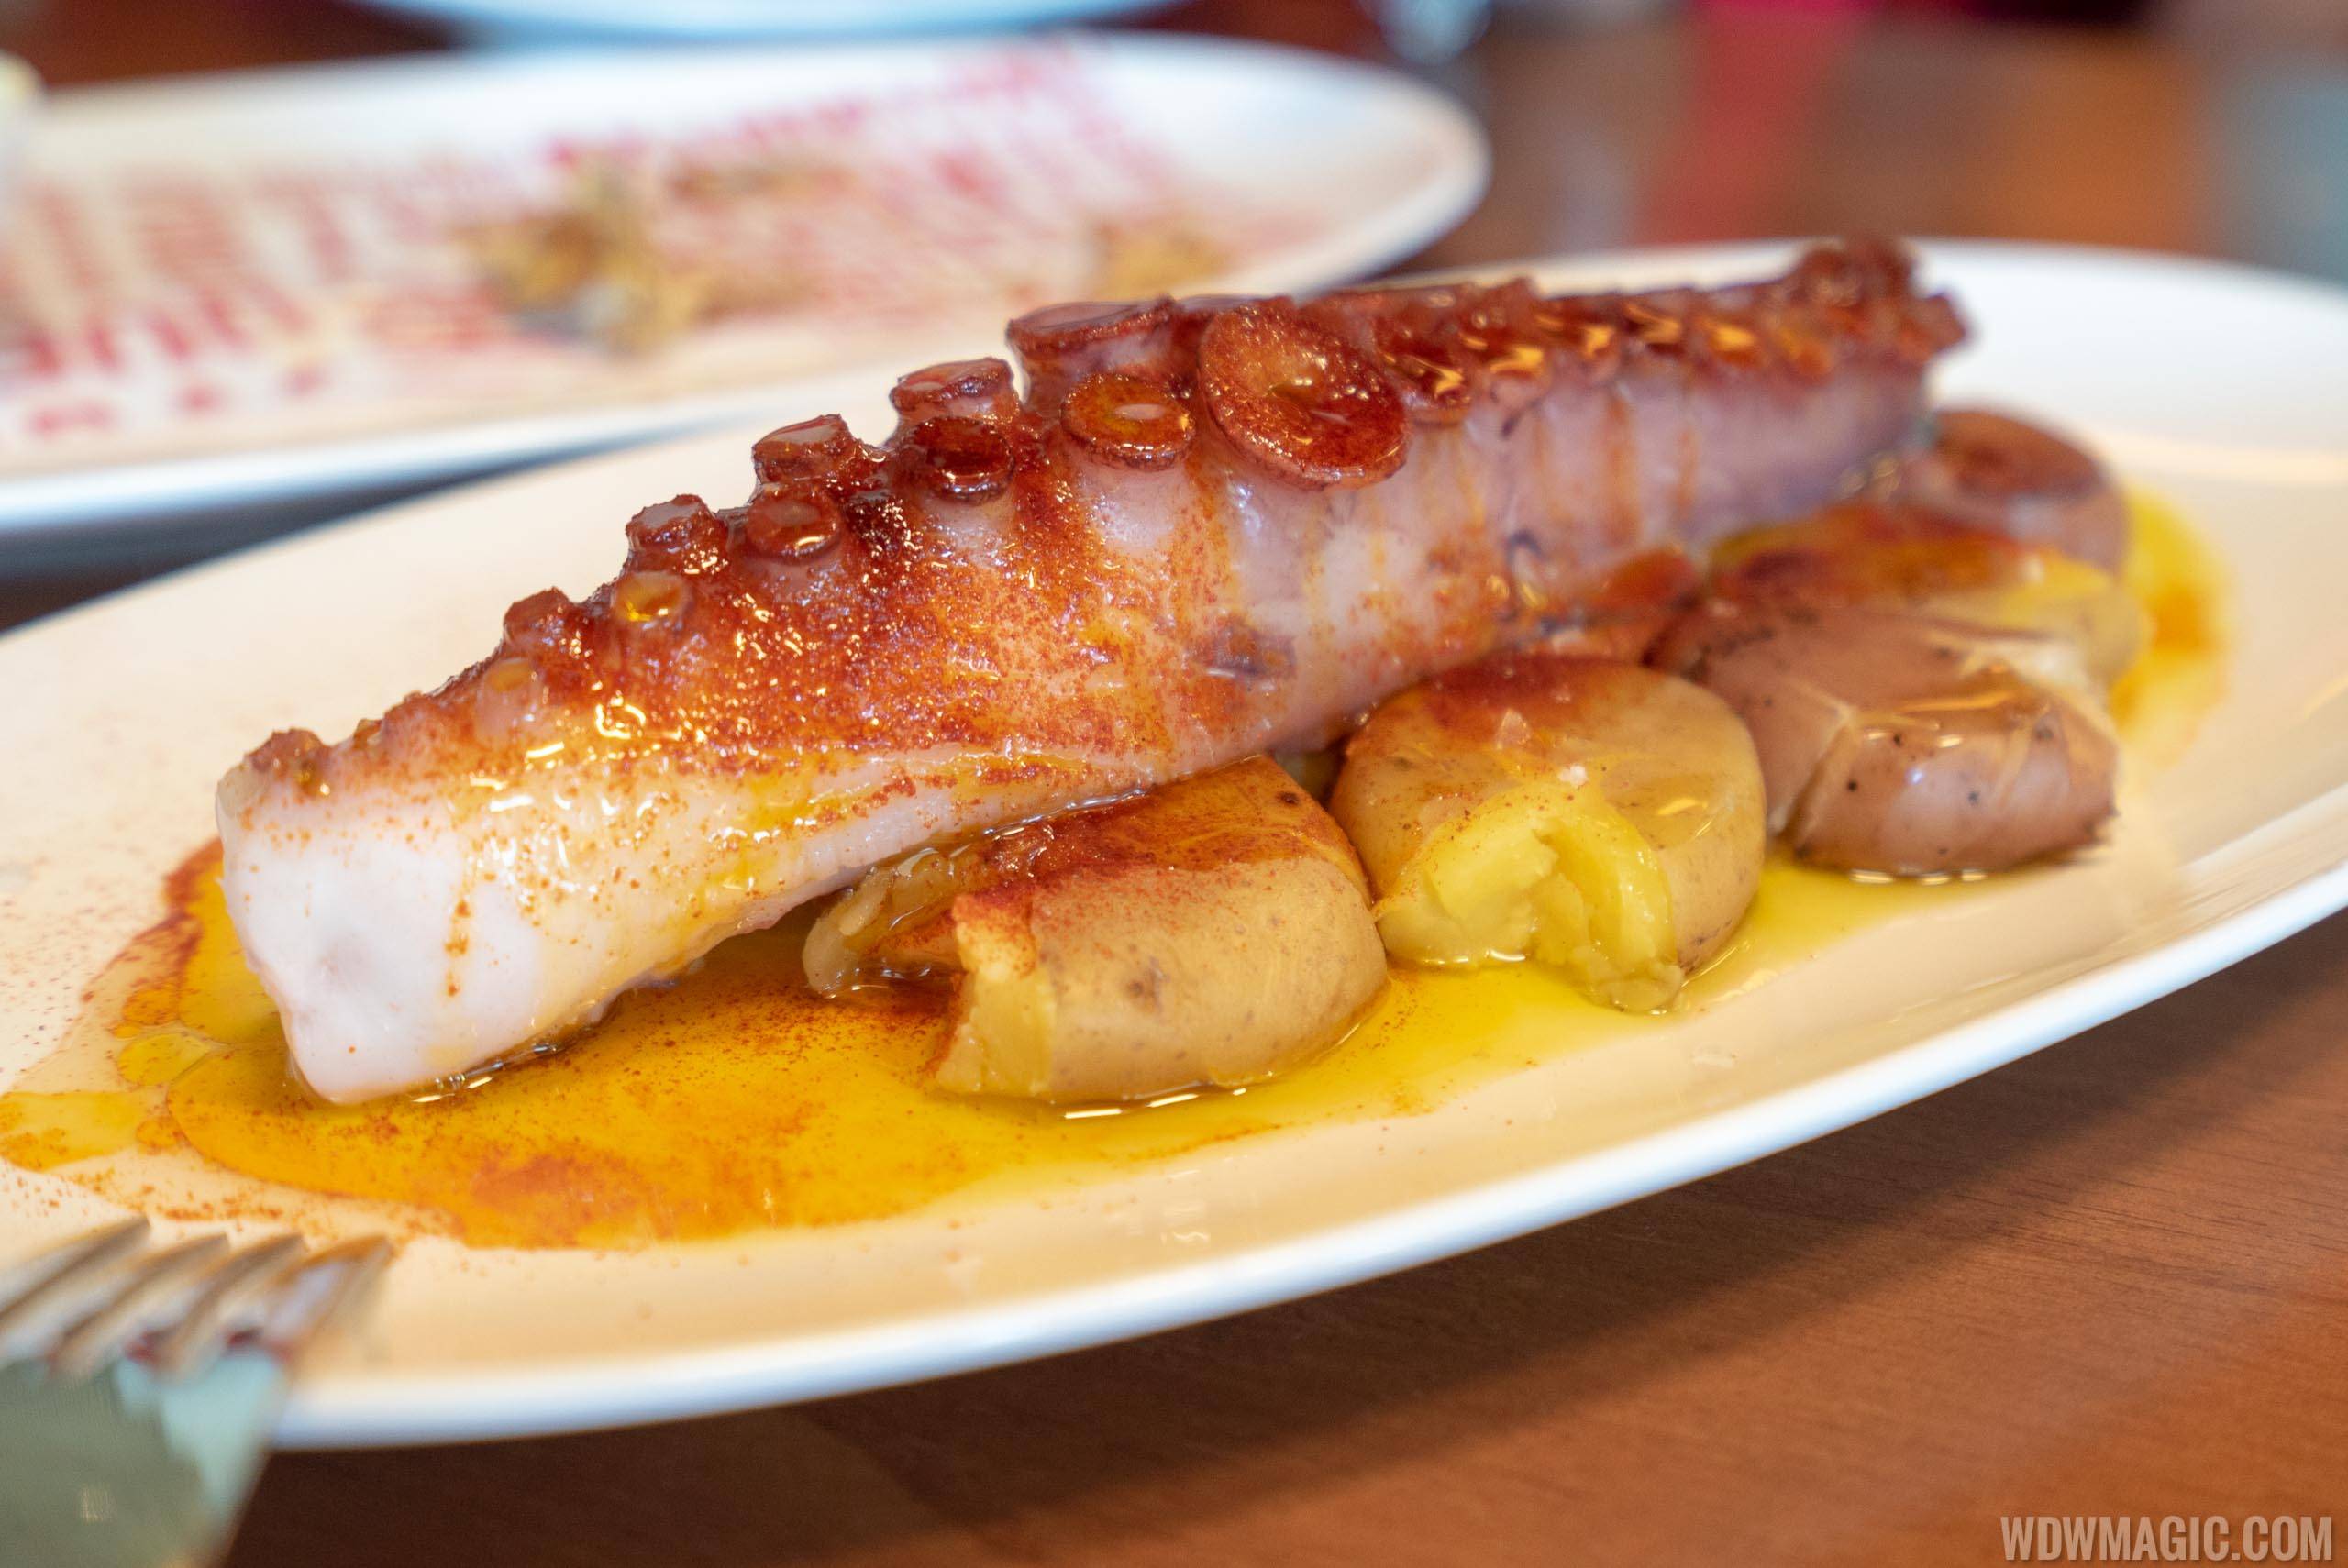 Chef's tasting menu: José's Way - Boiled octopus with peewee potatoes, pimentón and extra virgin olive oil